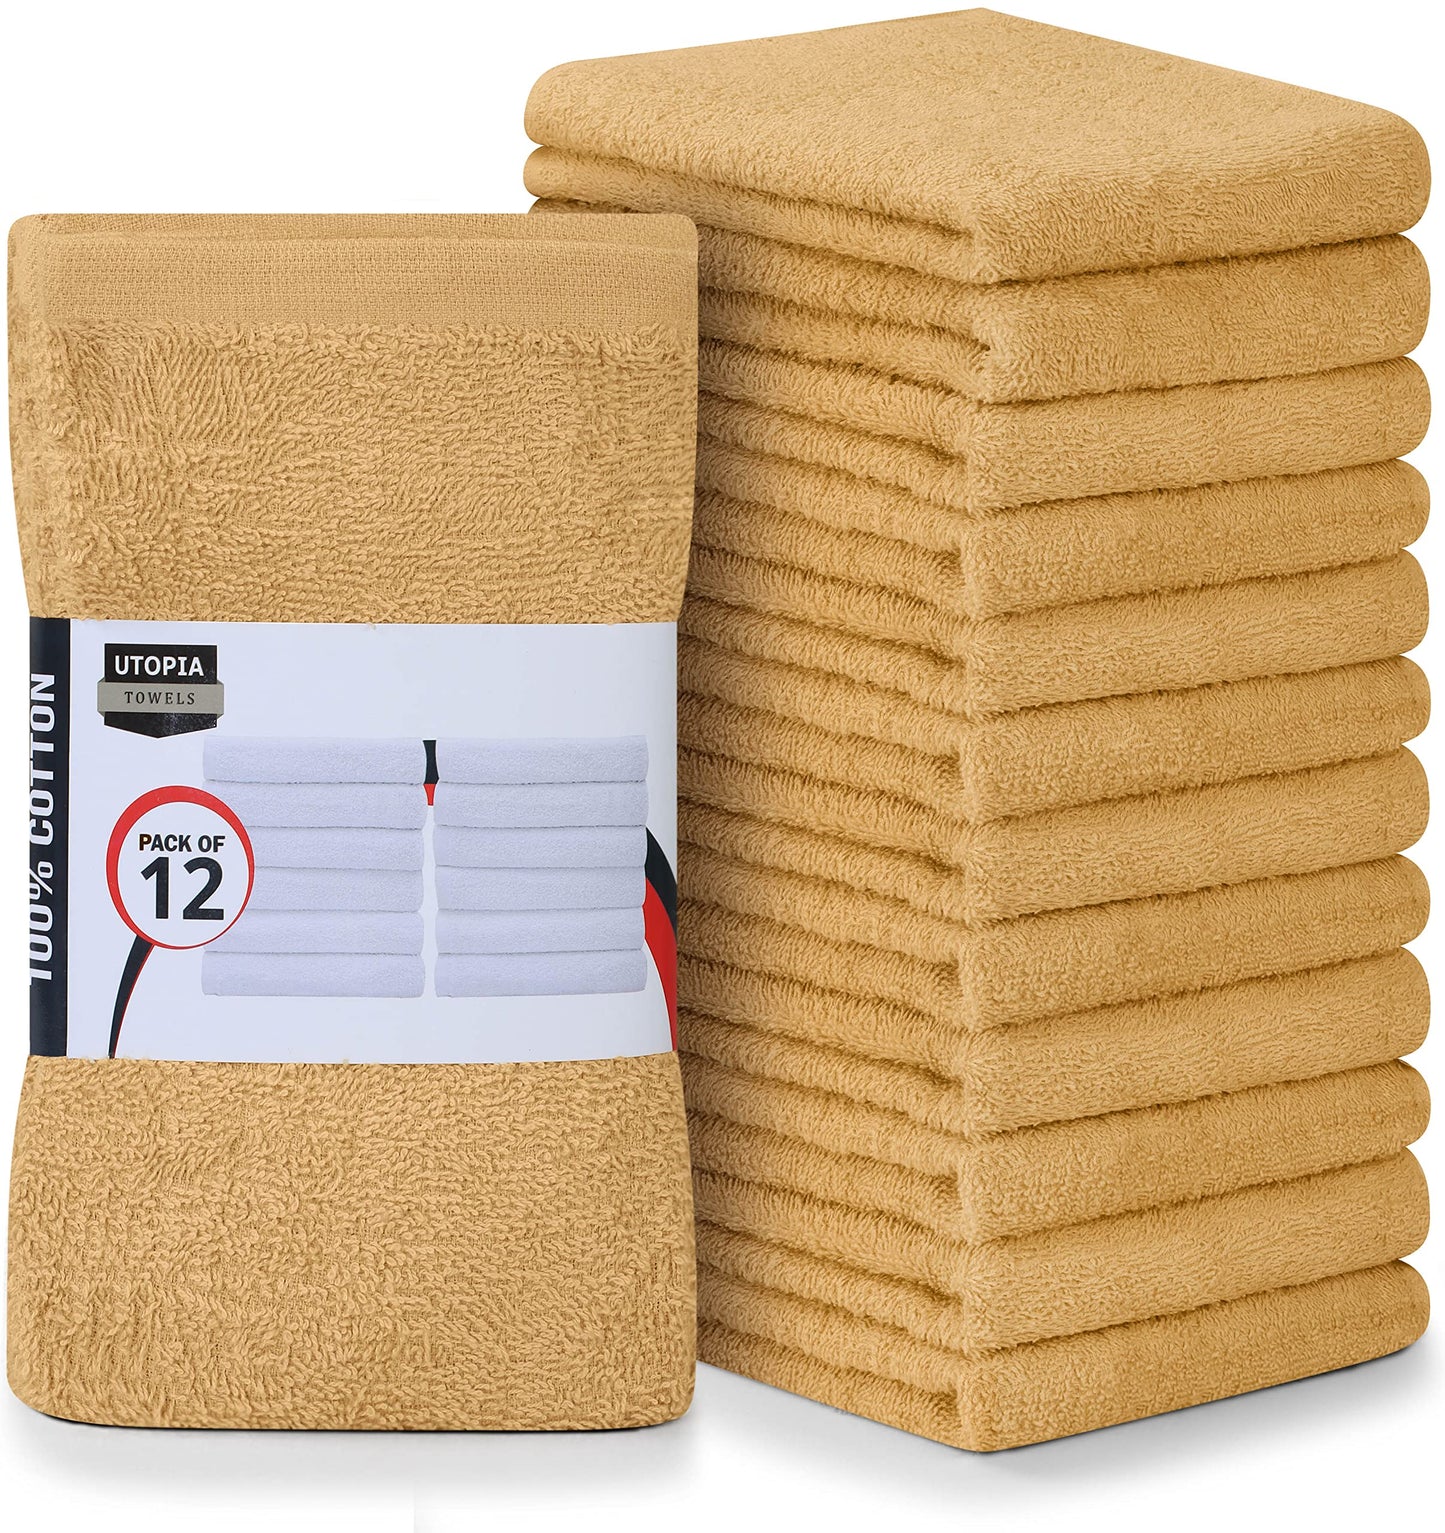 Utopia Towels Kitchen Bar Mops Towels, Pack of 12 Towels - 16 x 19 Inches, 100% Cotton Super Absorbent Beige Bar Towels, Multi-Purpose Cleaning Towels for Home and Kitchen Bars